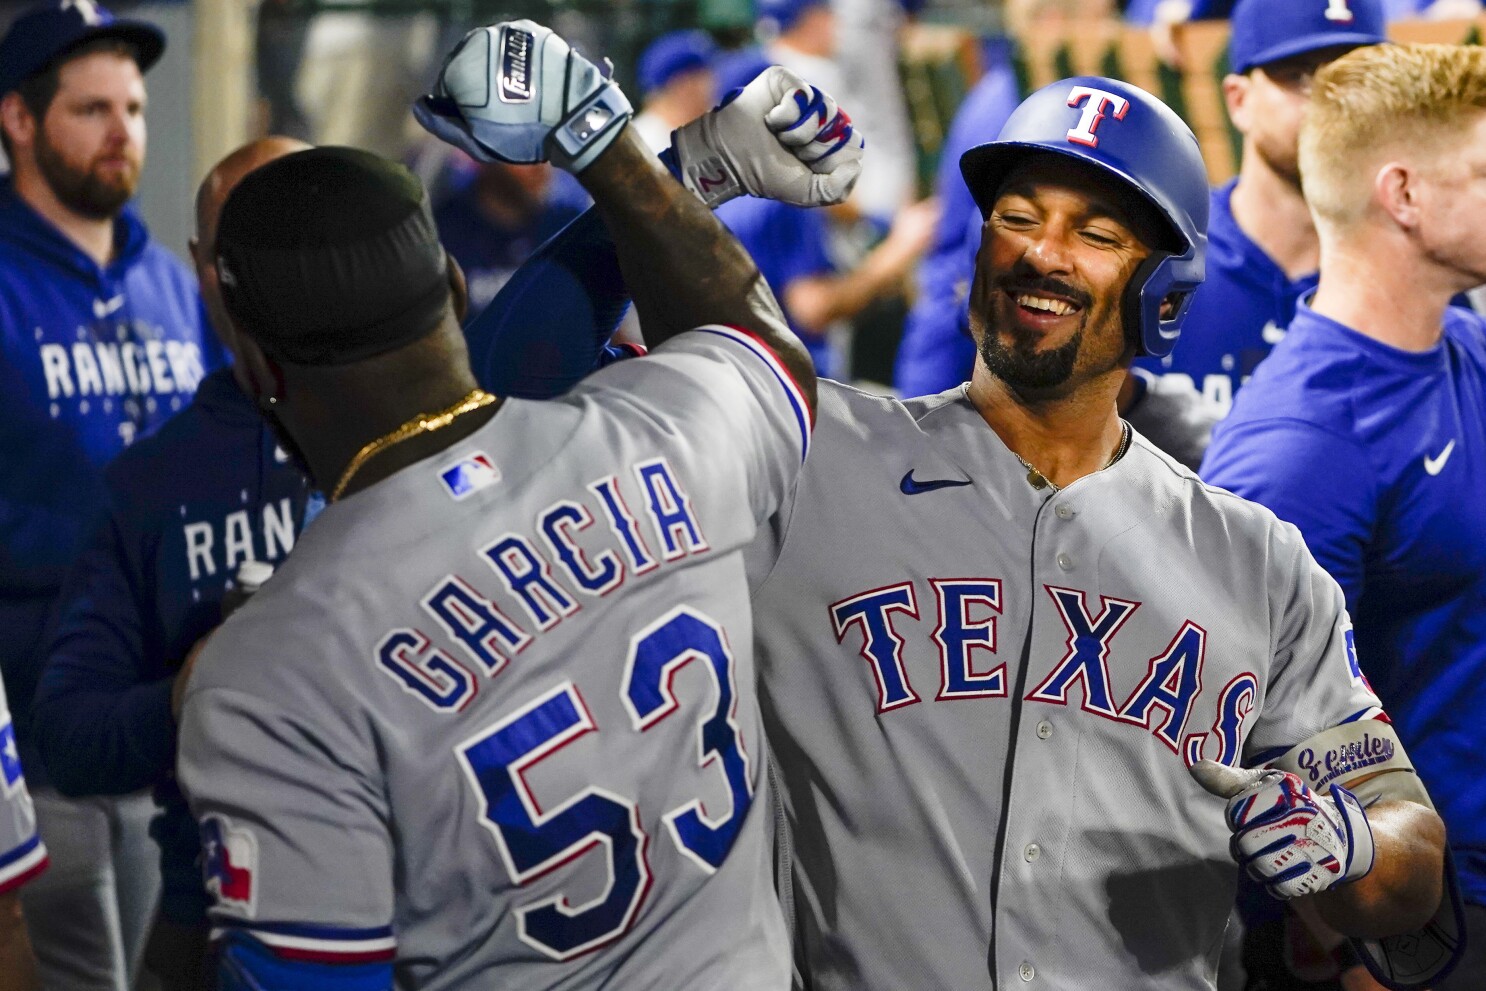 Rangers back Gray with 3 straight homers, beat Angels 5-1 to